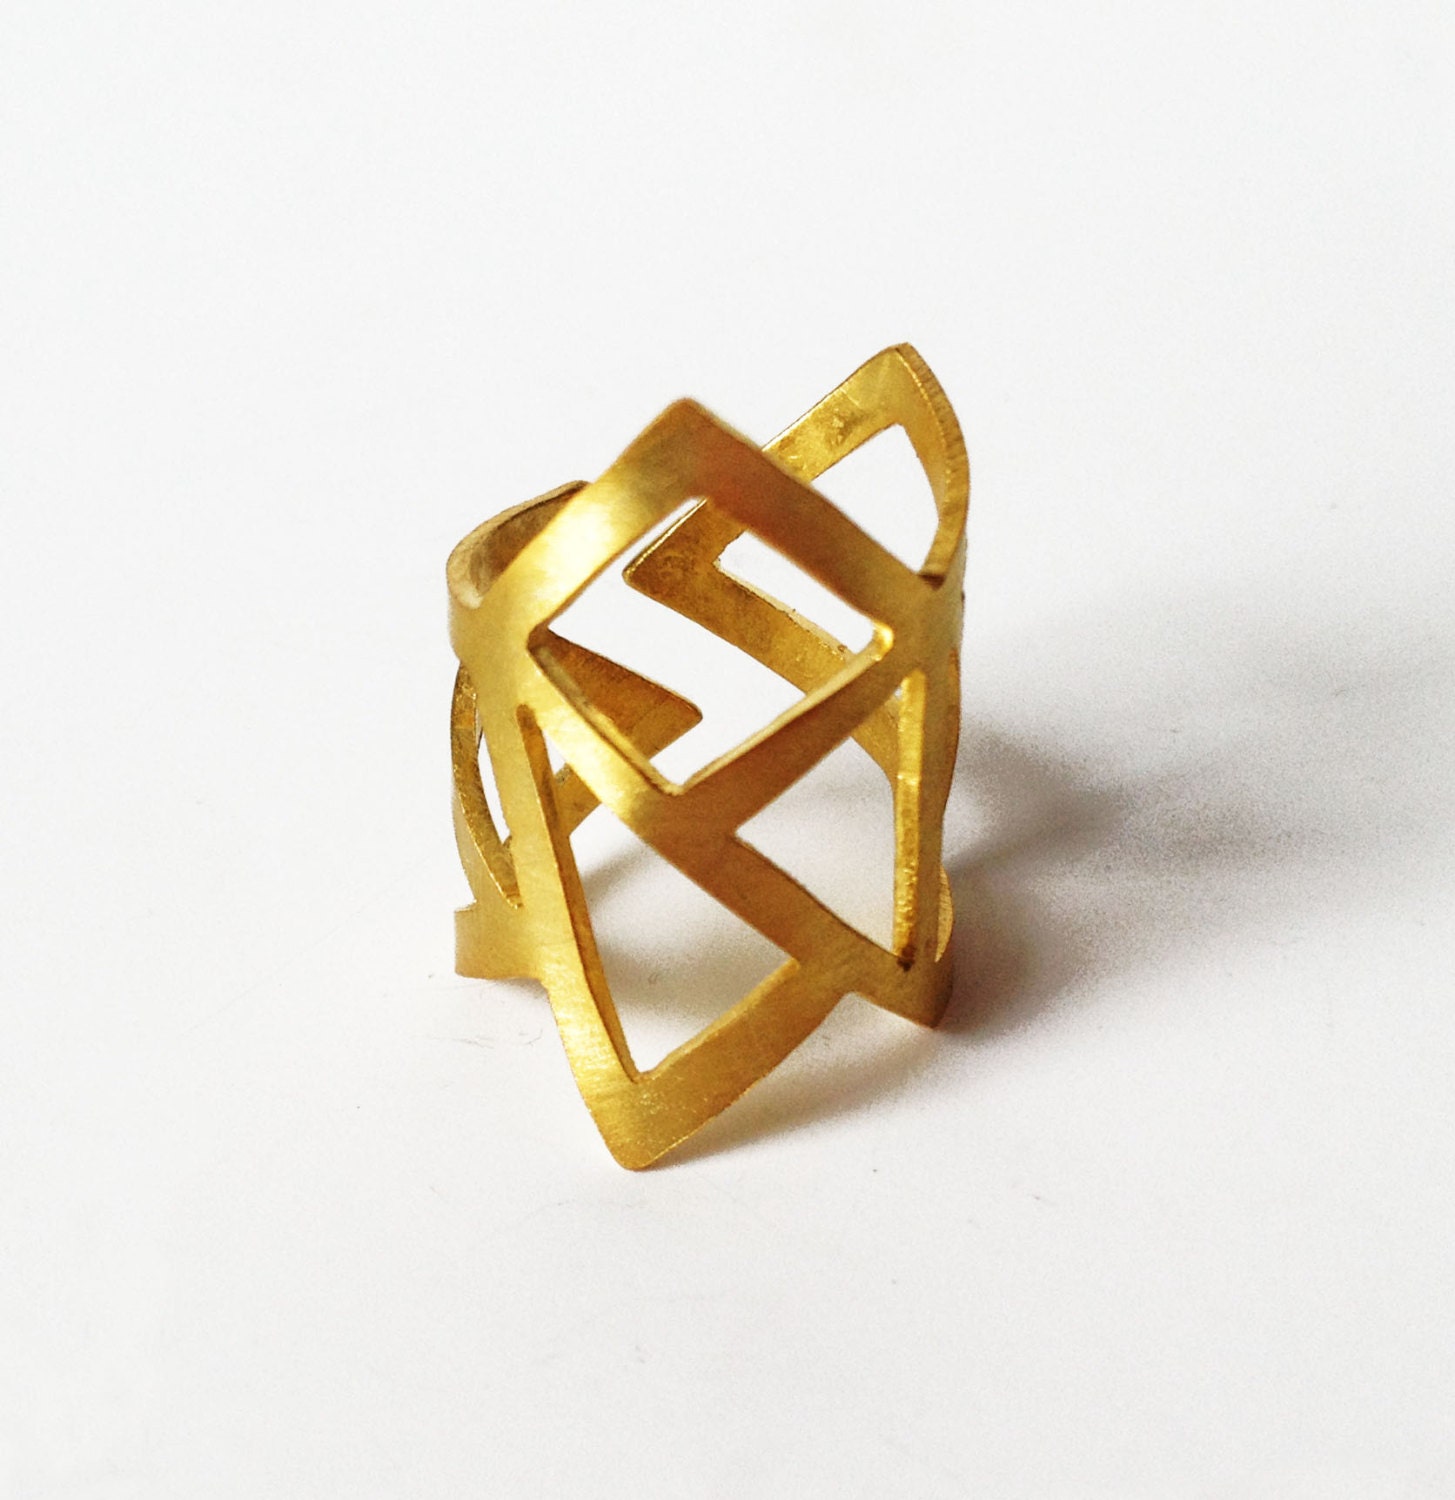 gold ring - 24K gold plated bronze ring -  statement ring - adjustable ring/ Le blog d'awa ETSY